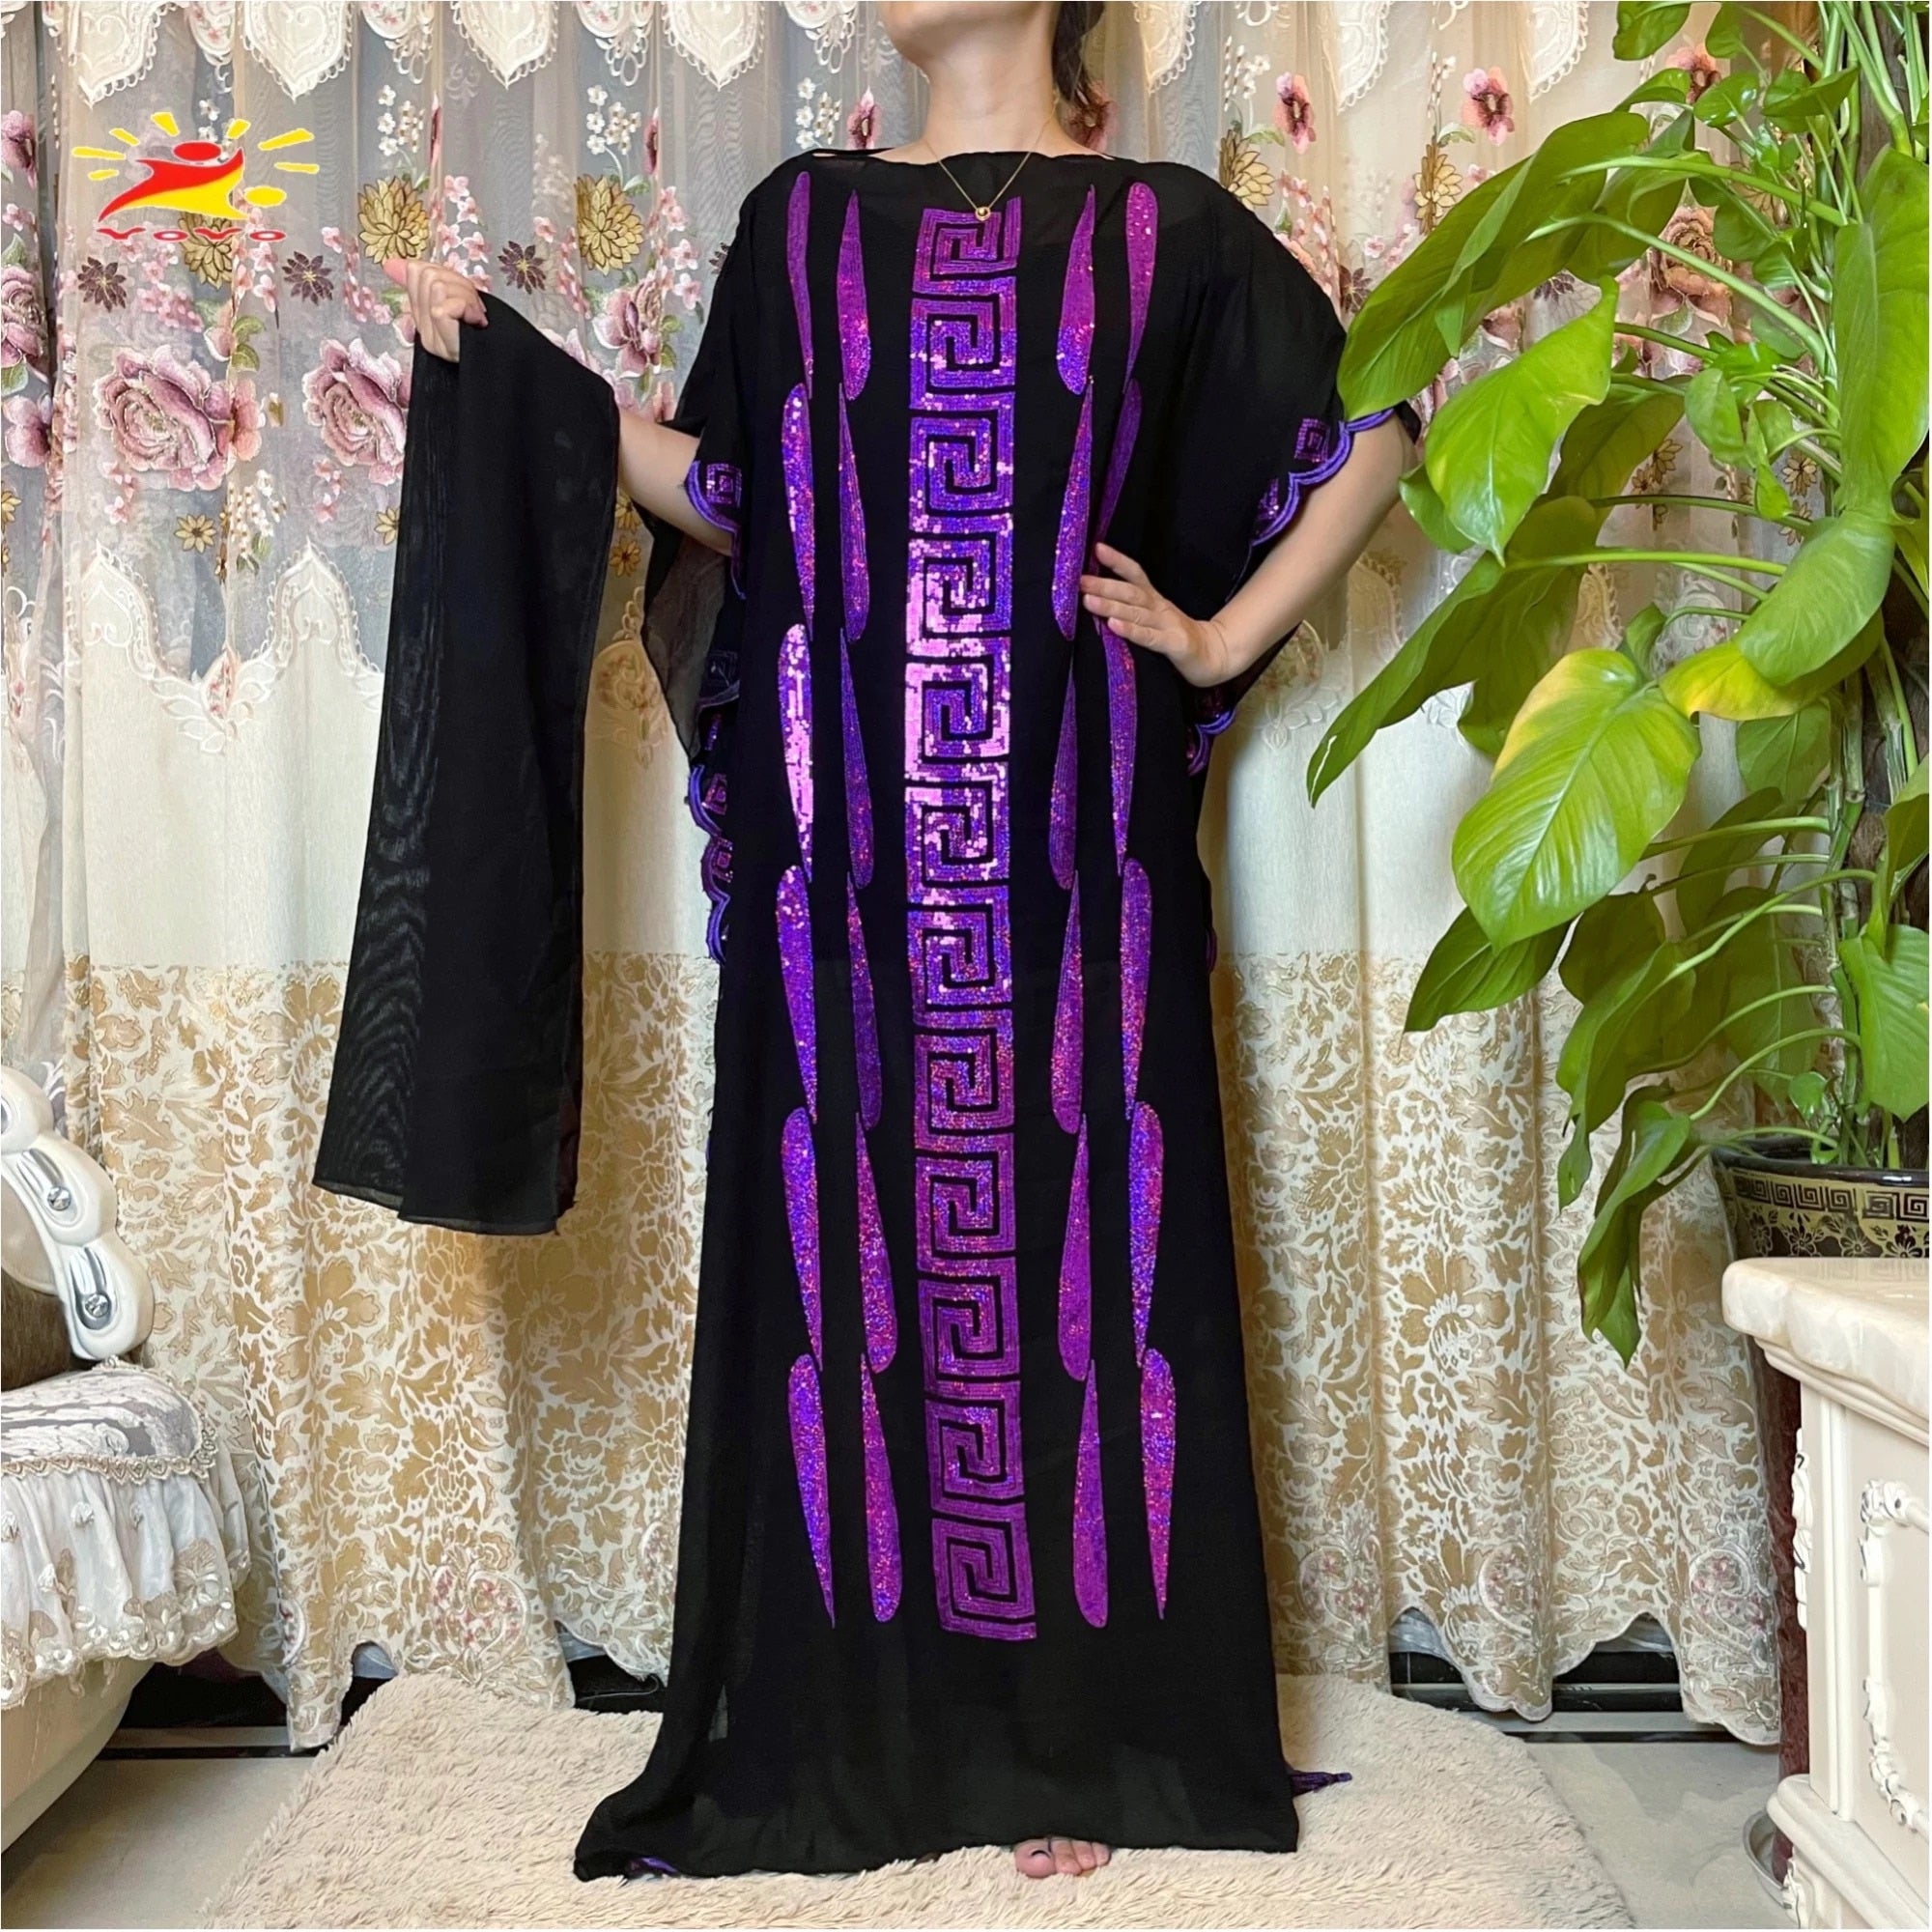 Stunning African Embroidery Flower Dress for Women - Muslim Sequin Embroidery and Scarf Included - Flexi Africa - Flexi Africa offers Free Delivery Worldwide - Vibrant African traditional clothing showcasing bold prints and intricate designs